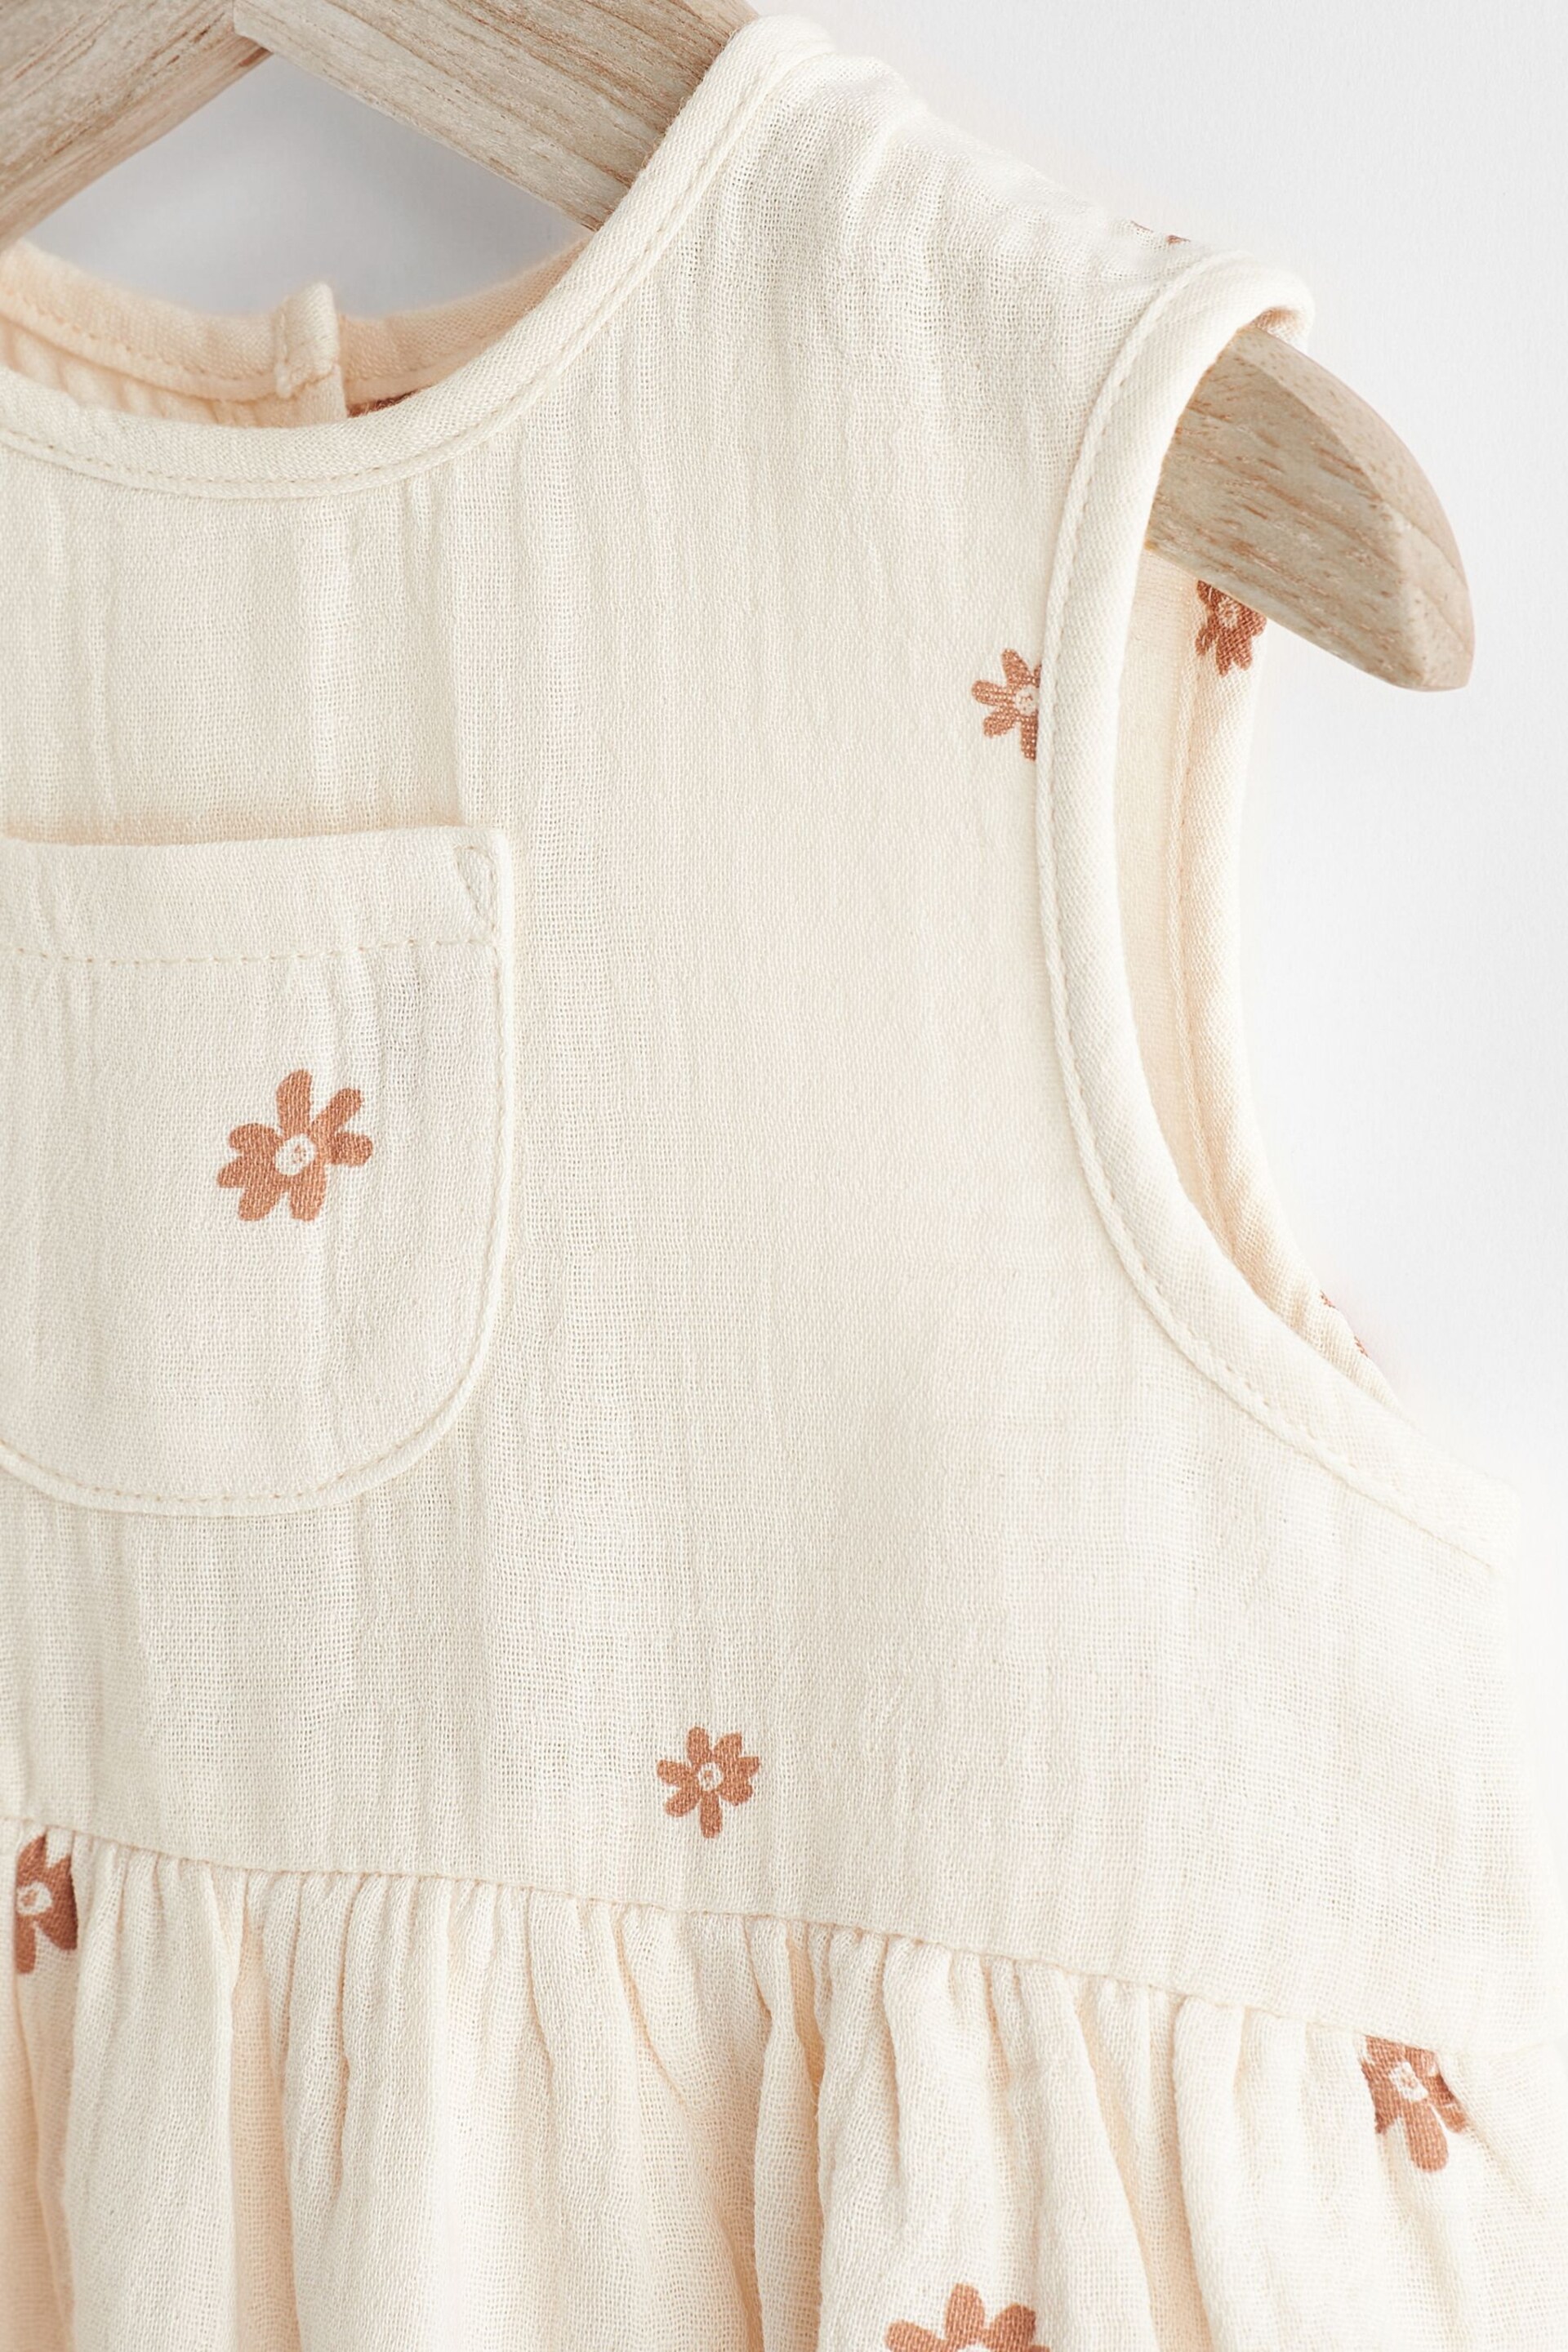 Beige Floral Embroidery Baby Bloomer Romper (0mths-3yrs) - Image 7 of 10